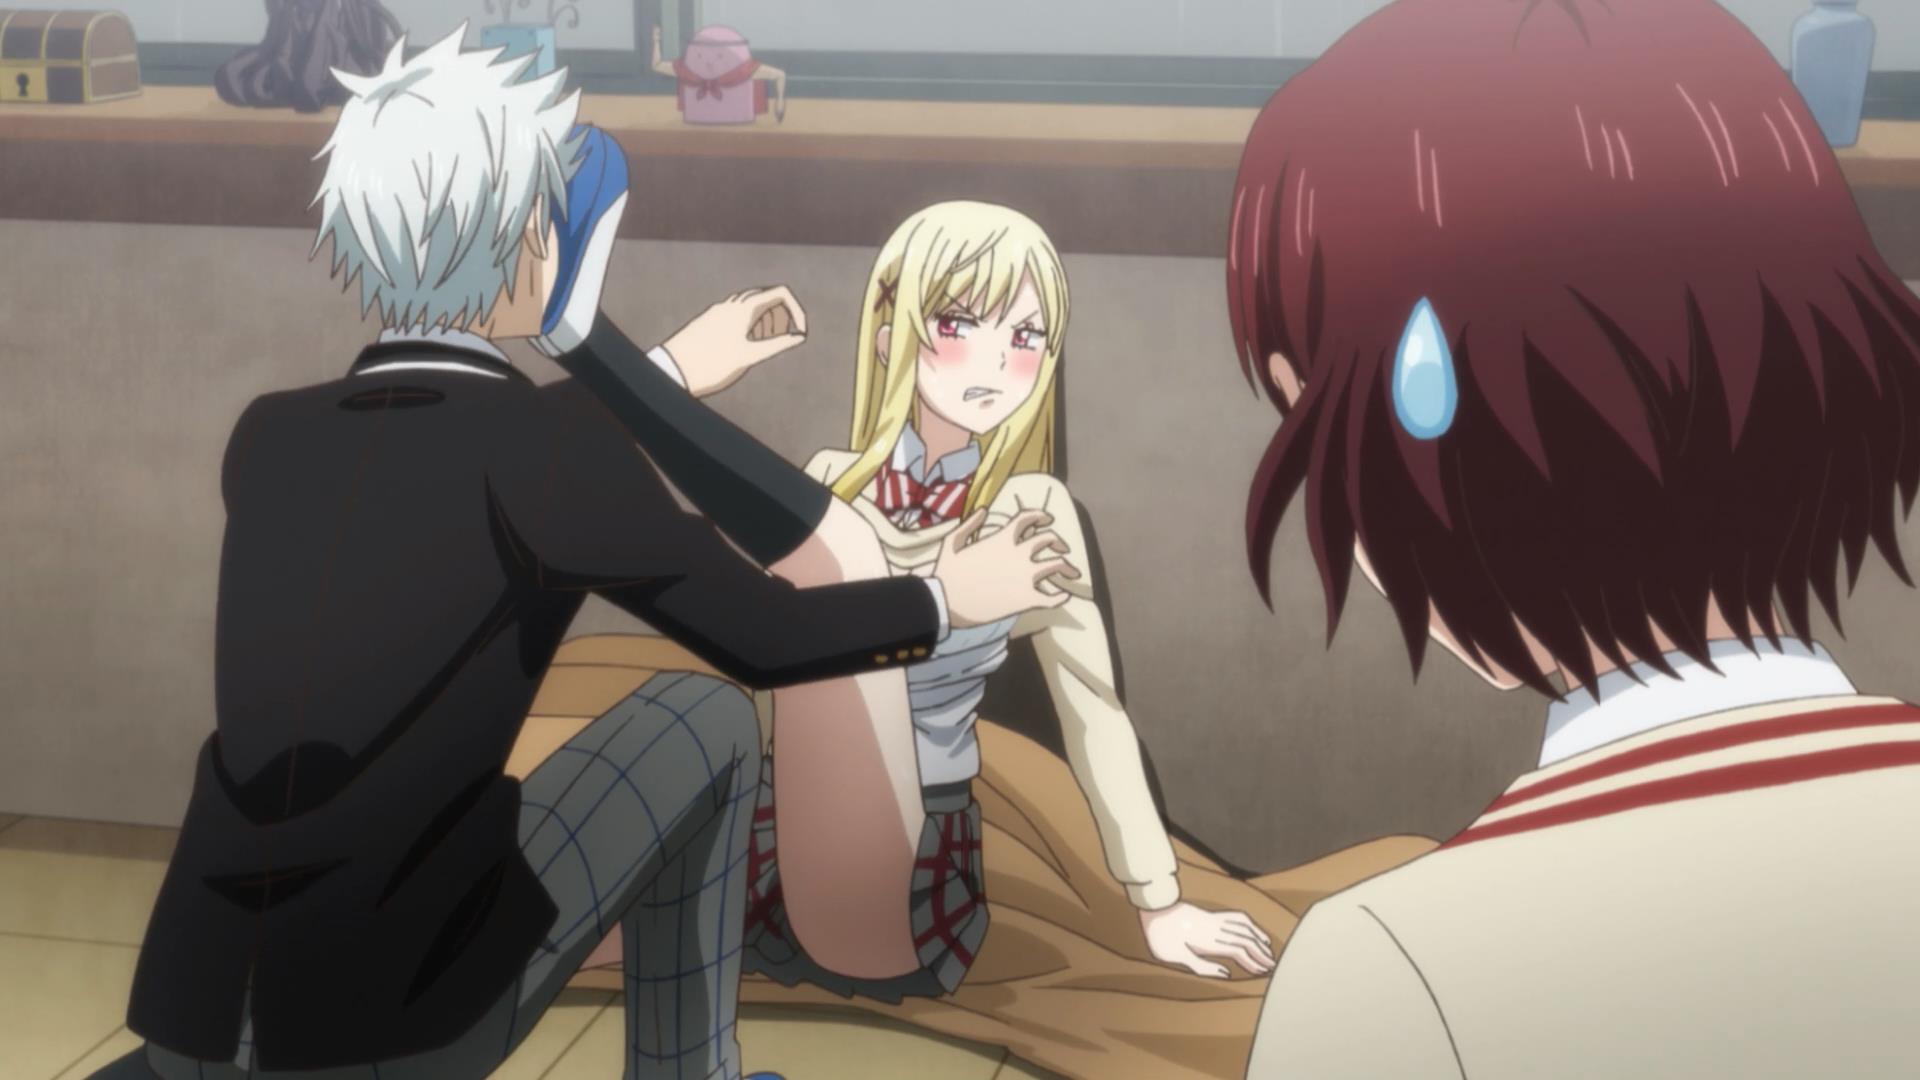 [HorribleSubs]_Yamada-kun_and_the_Seven_Witches_-_03_[1080p].mkv.dcc_snapshot_15.36_[2015.04.26_14.35.49]